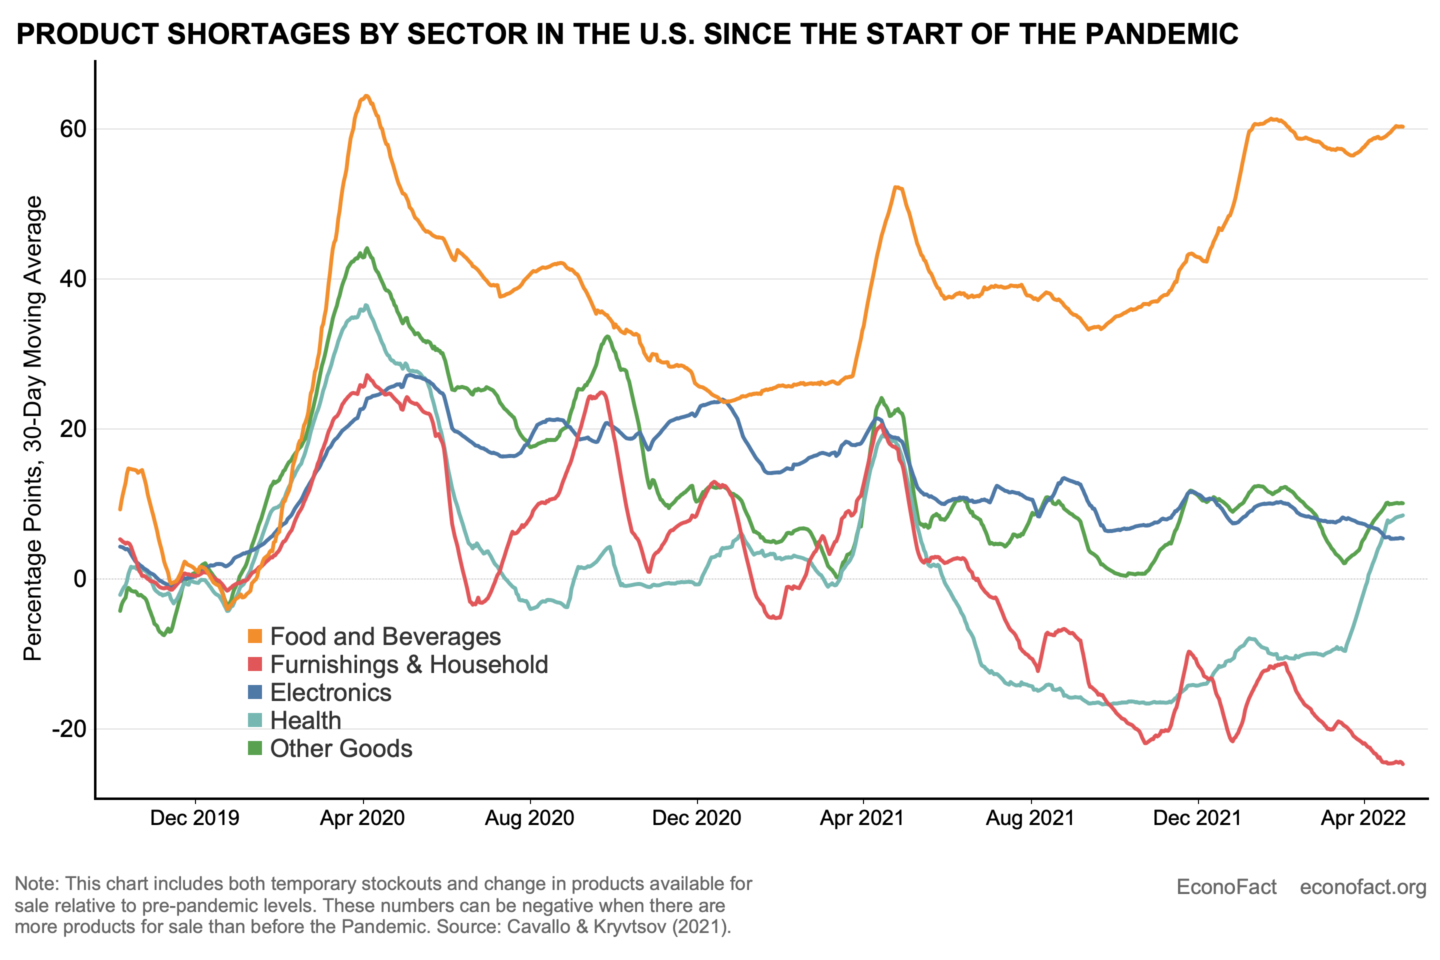 Product Shortages By Sector In the U.S. Since the Start of the Pandemic. Since 2019, the Food and Beverages sector has seen the greatest increase in product shortages relative to Furnishings & Household, Electronics, Health, and Other Goods.